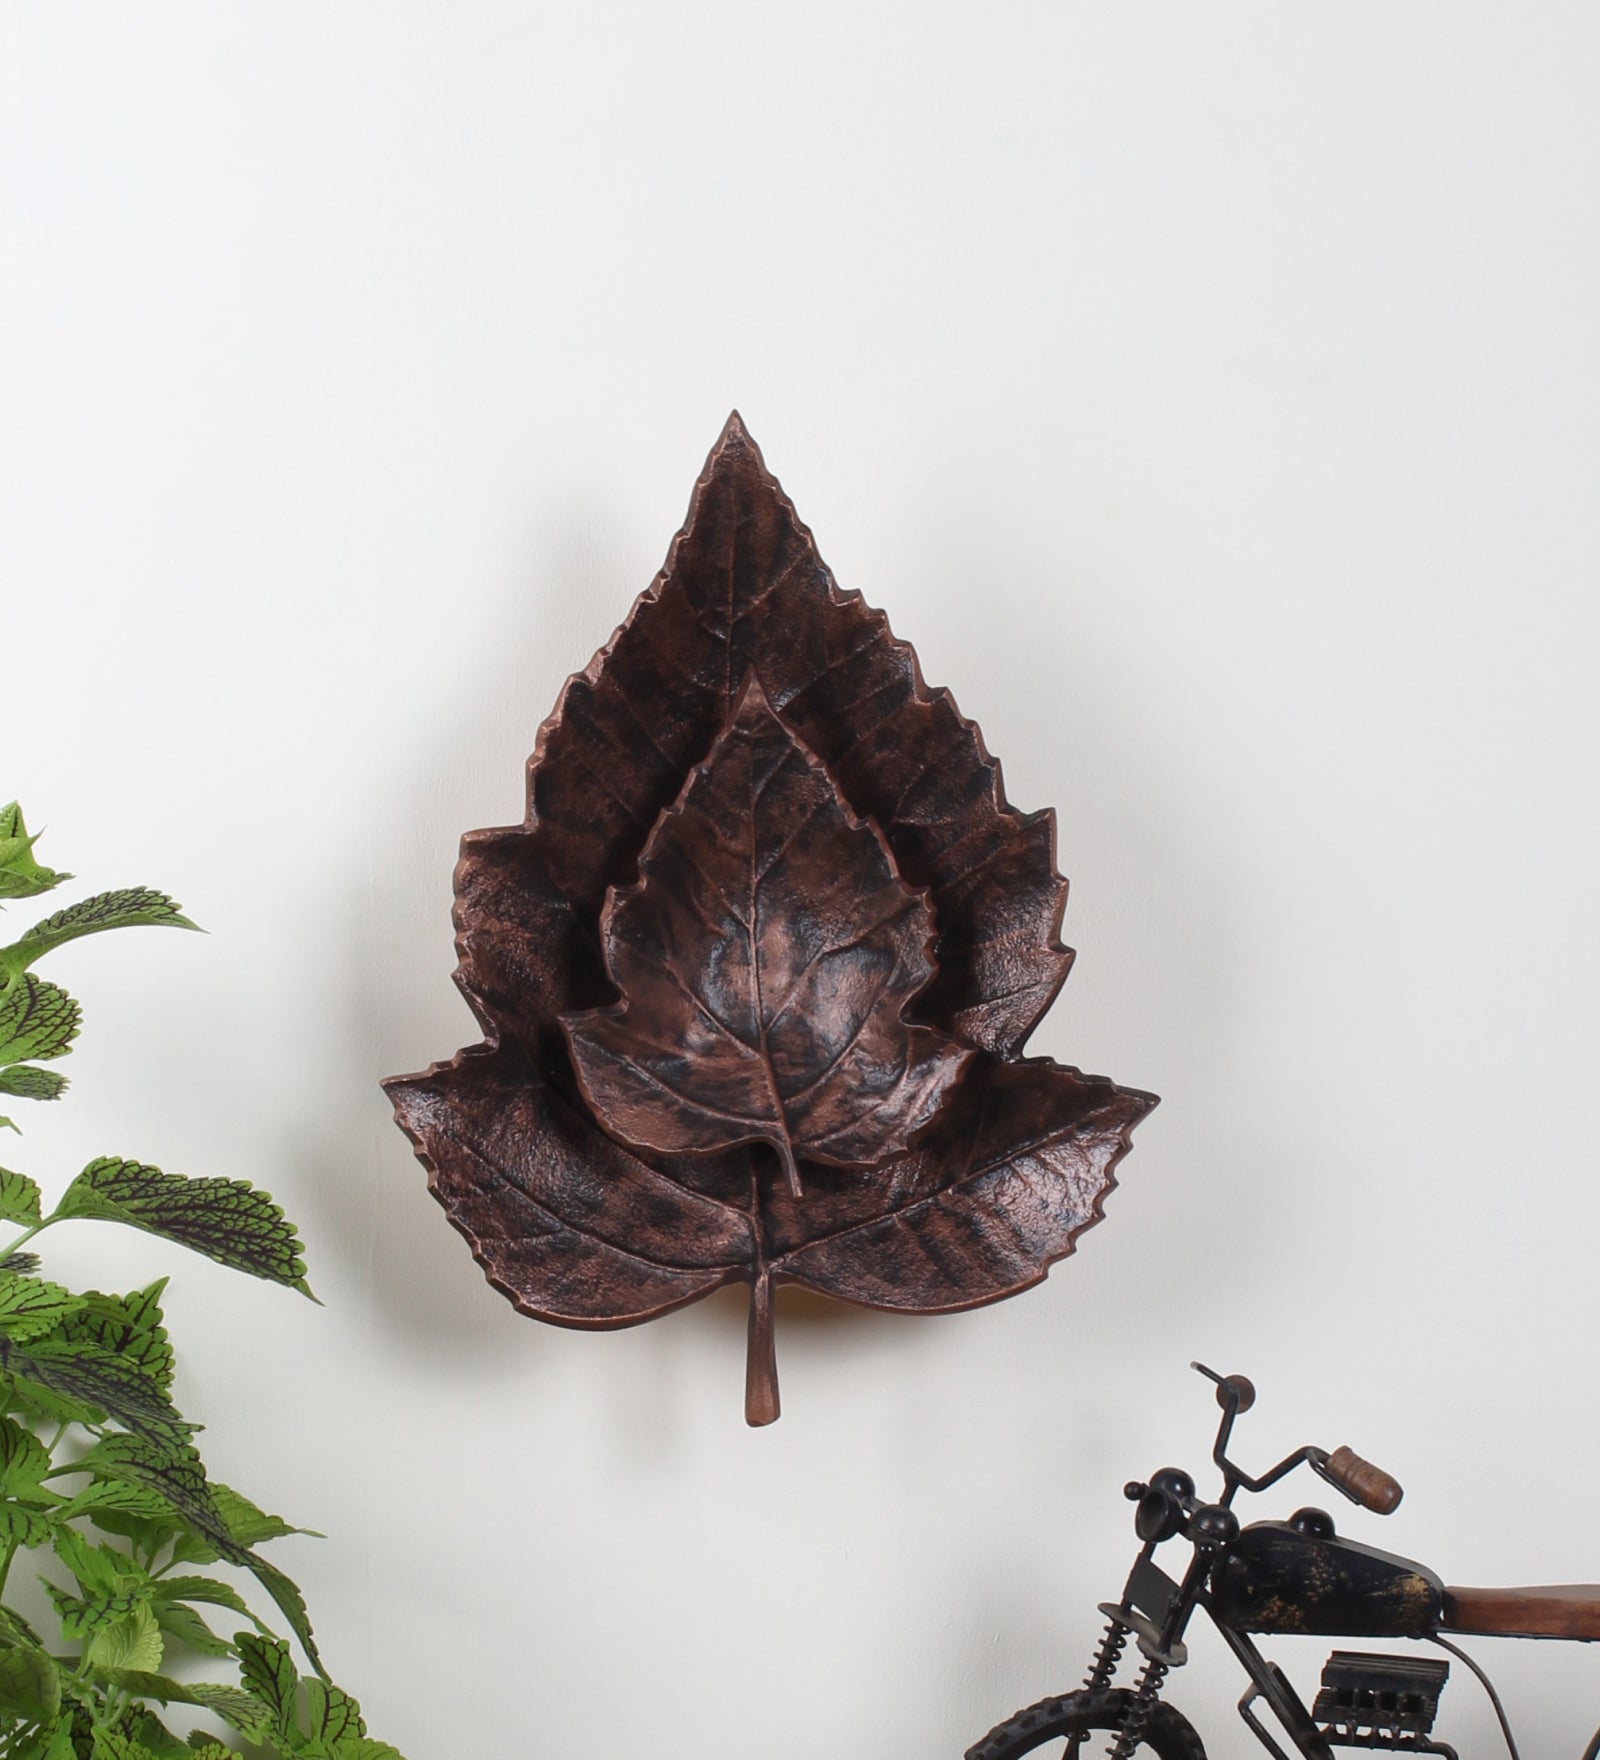 Leaf wall light is a Nature-inspired lighting